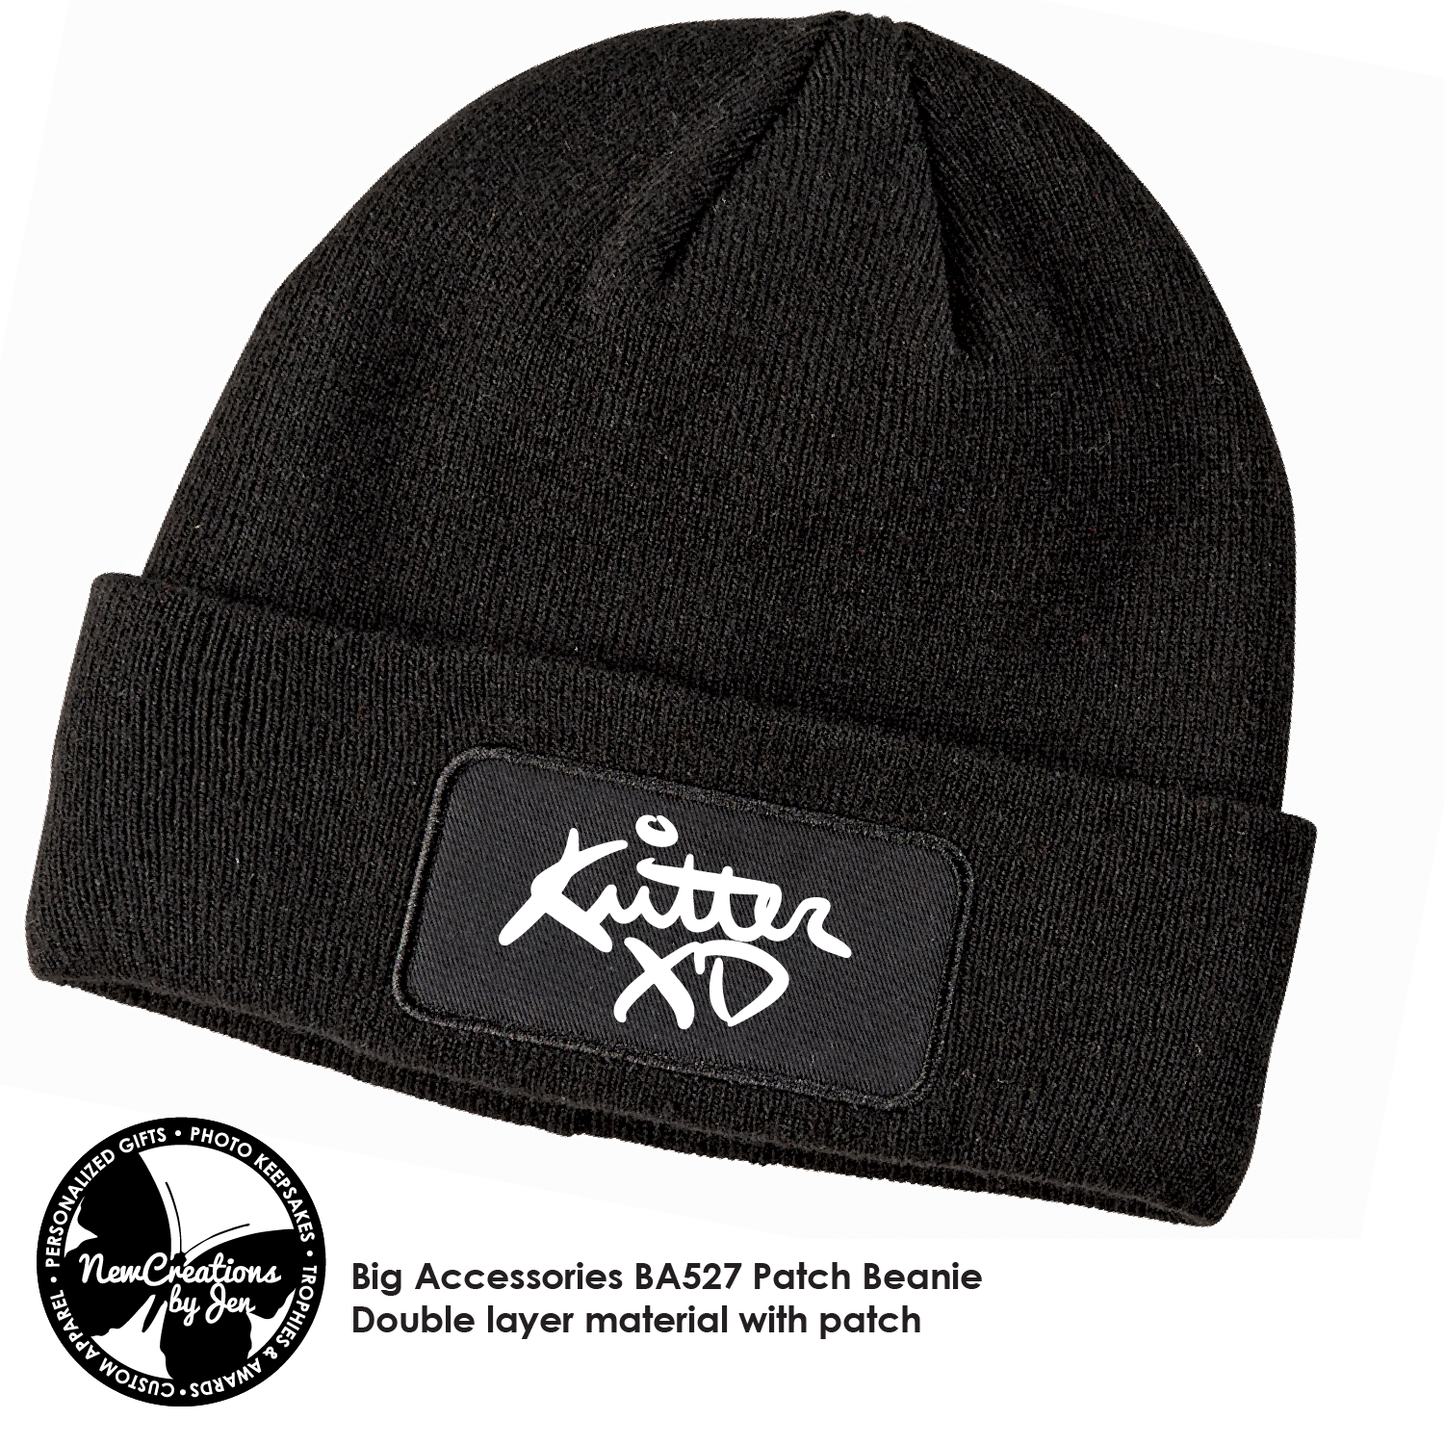 Kritter XD Beanie Cap with art on patch BA527